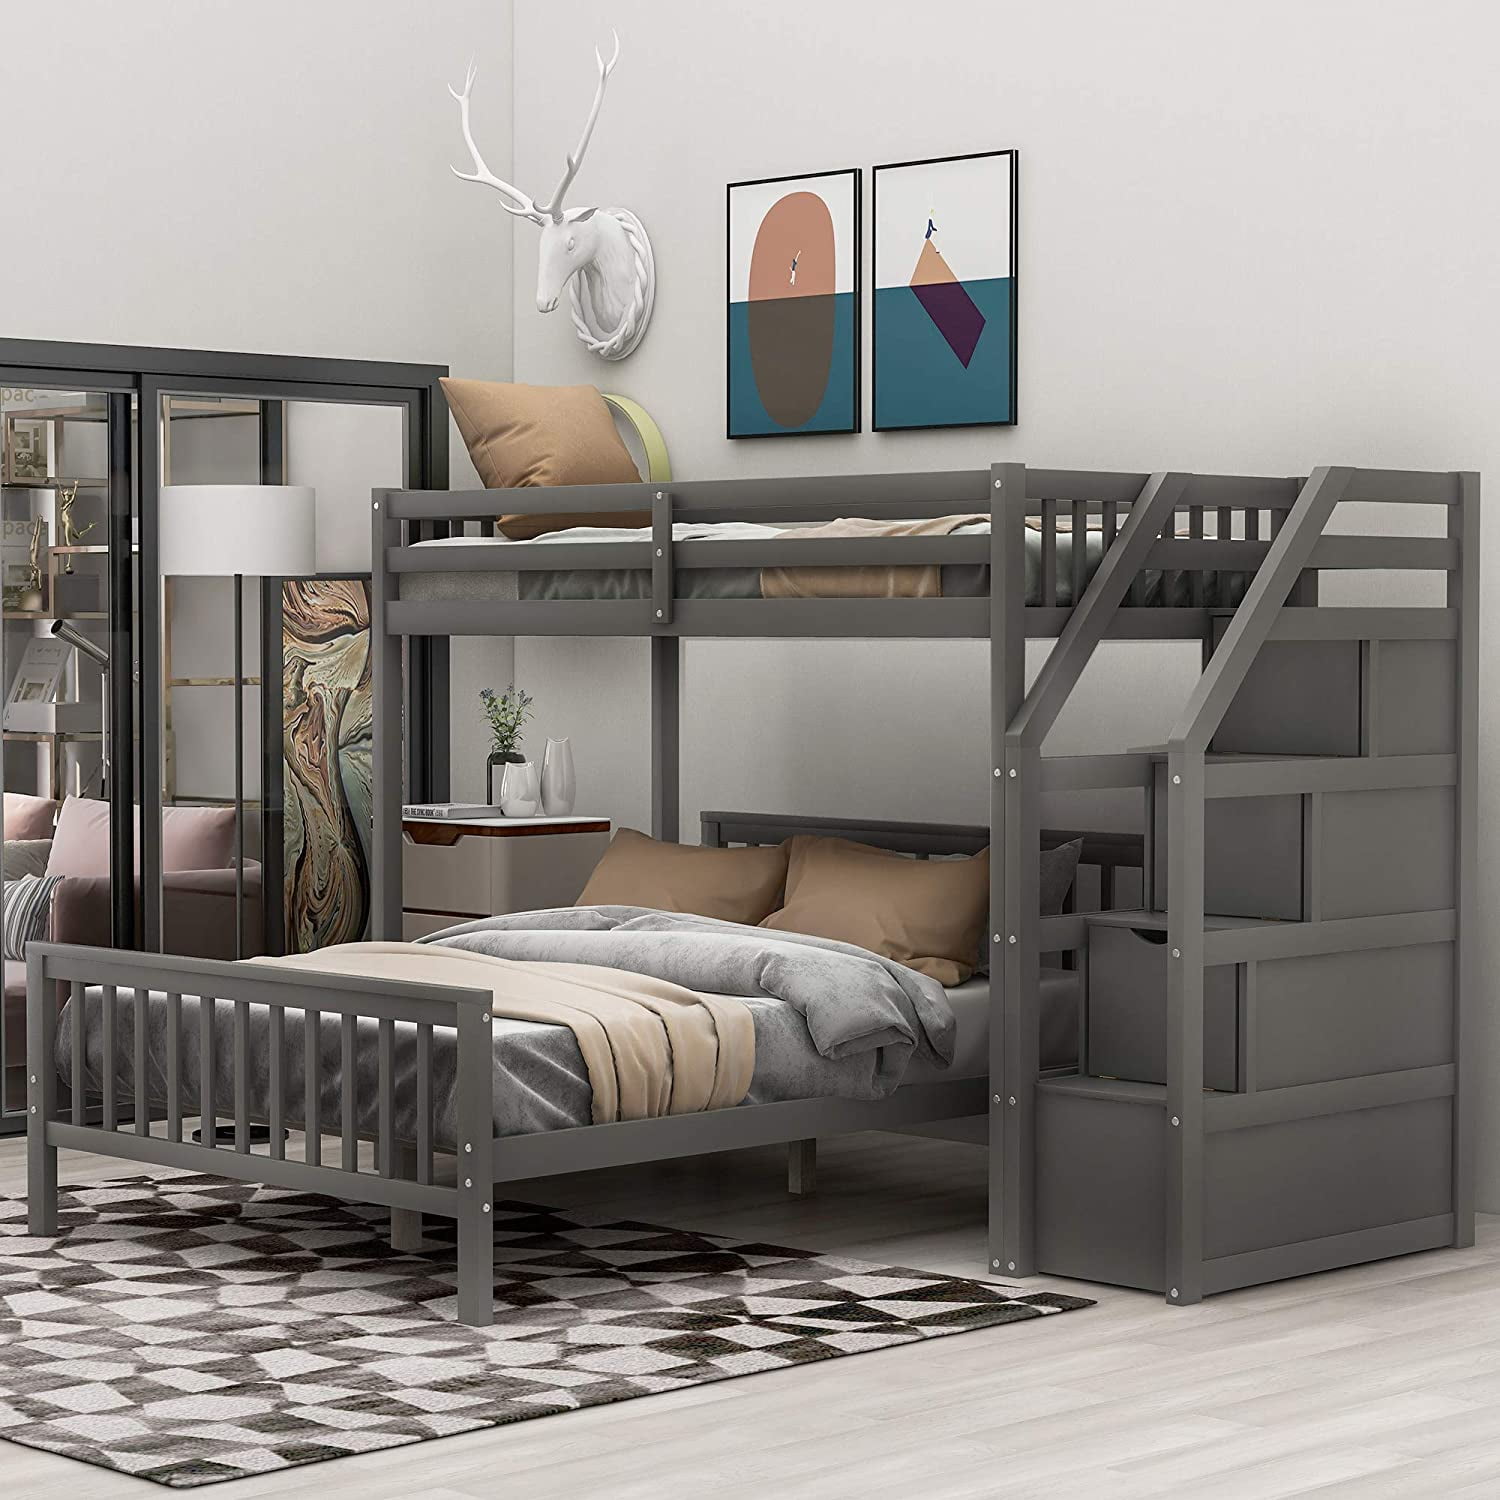 Twin Over Full Loft Beds Bunk, Full On Bunk Beds With Stairs